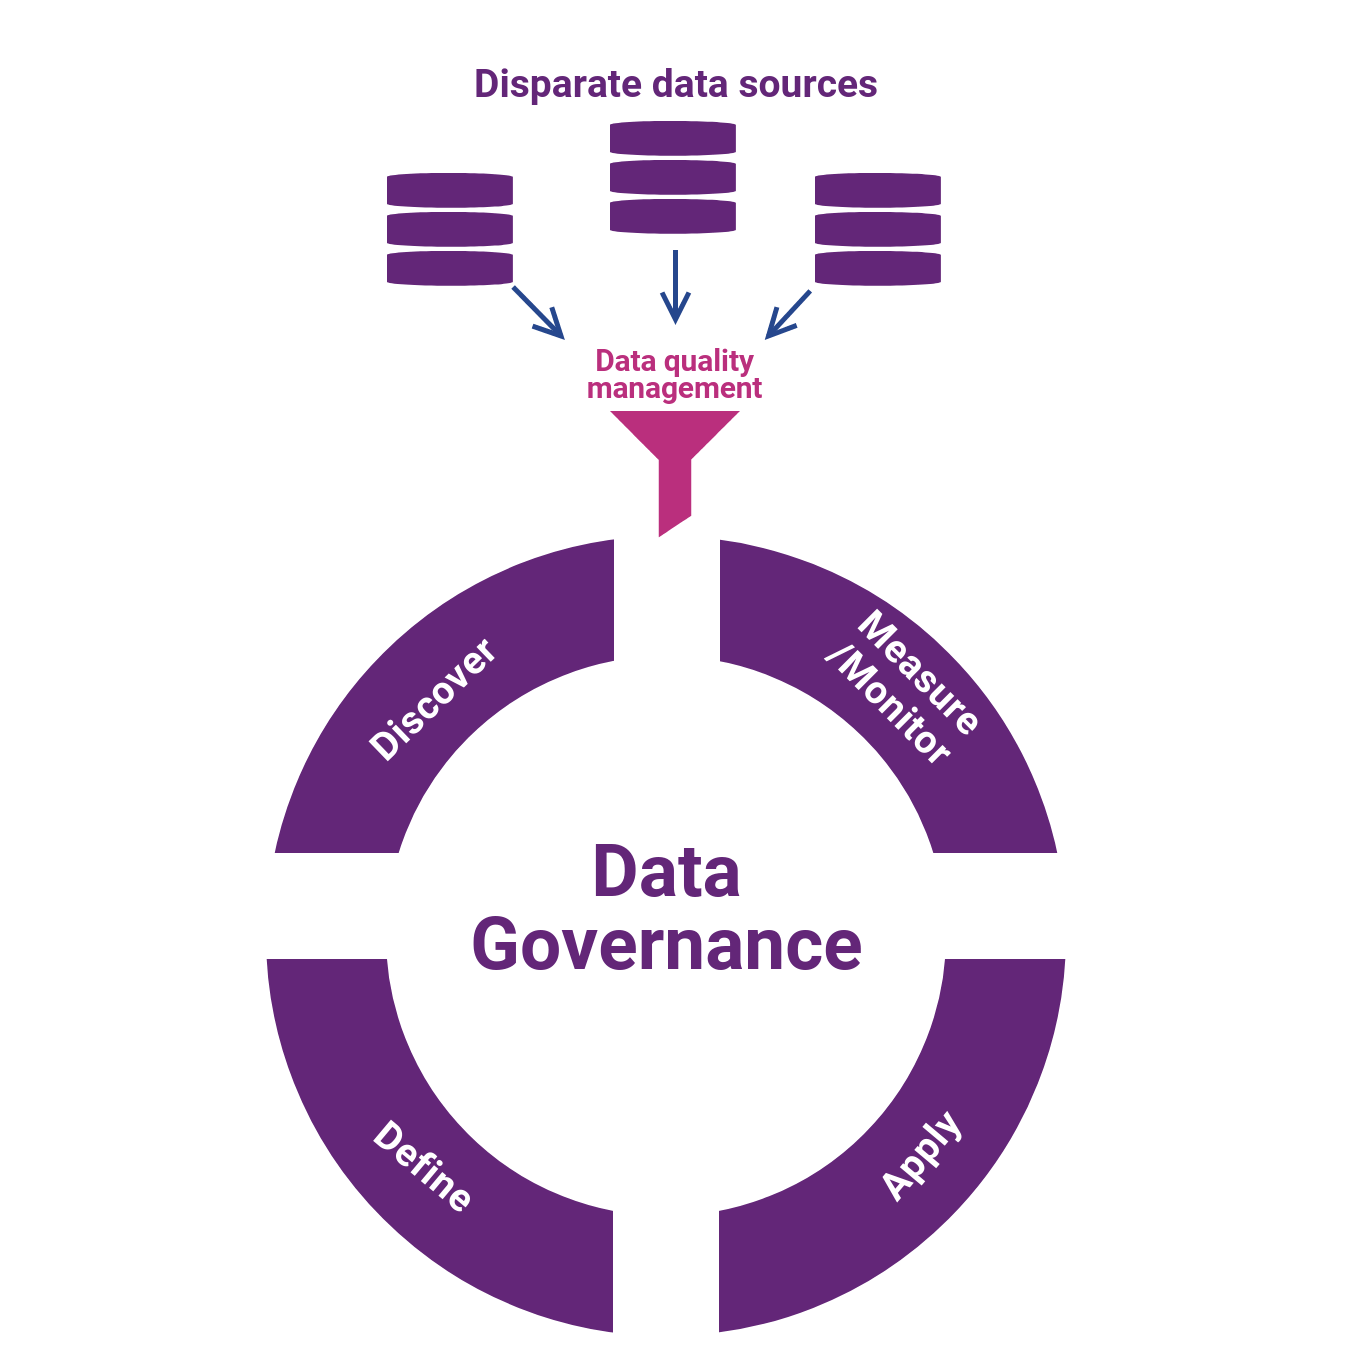 Data quality in the data governance process